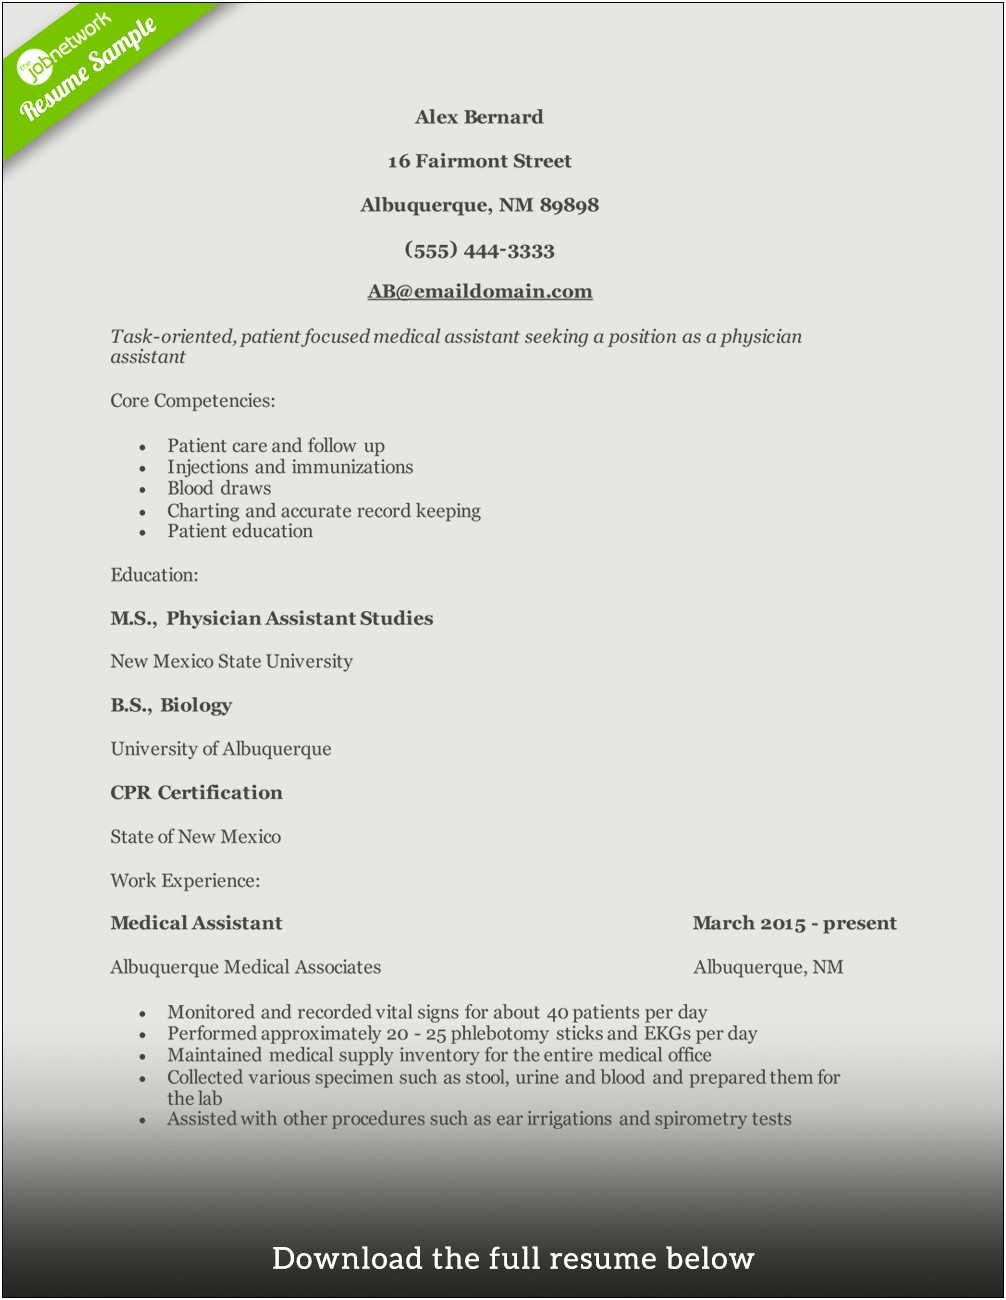 Physician Assistant 1st Job Resume Examples